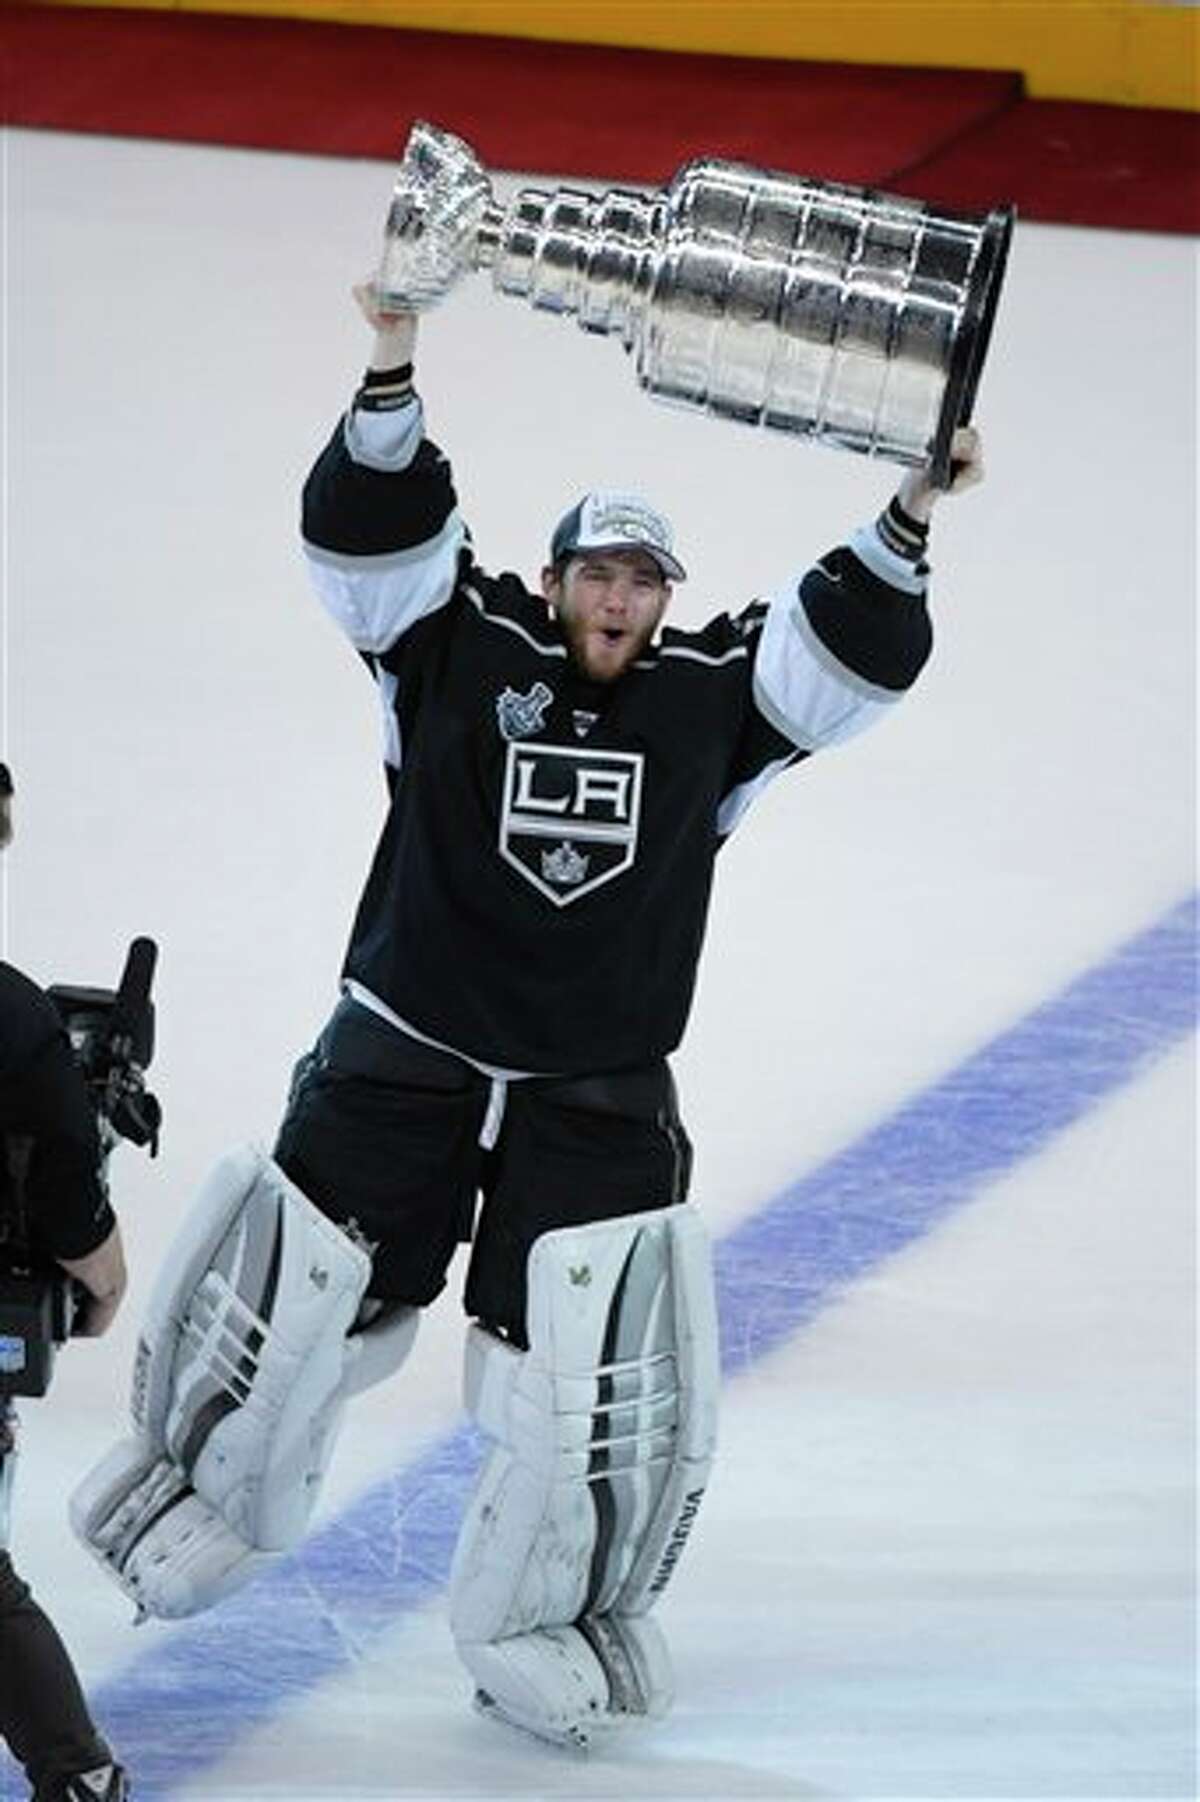 Jonathan Quick's legacy with the Kings written with Stanley Cups